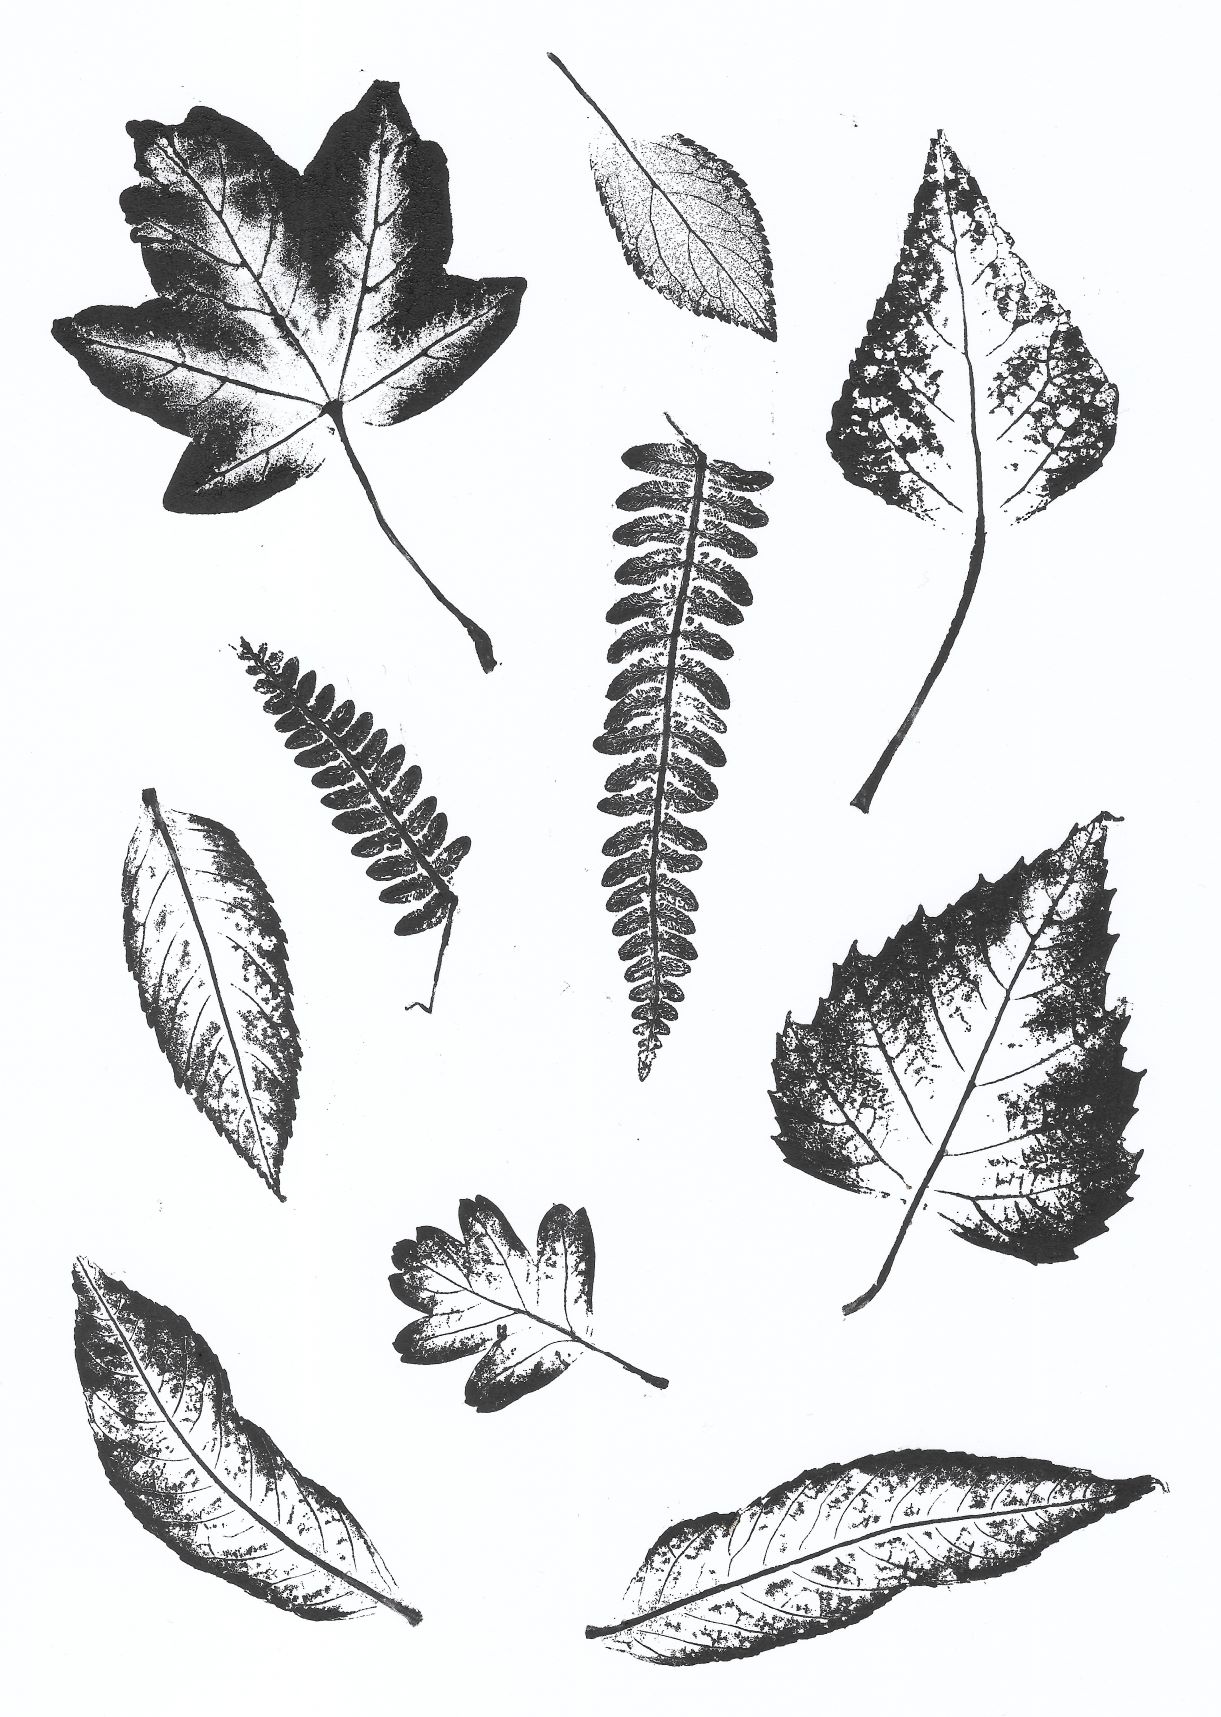 Black and white monotype print made using leaves collected in Epping Forest.